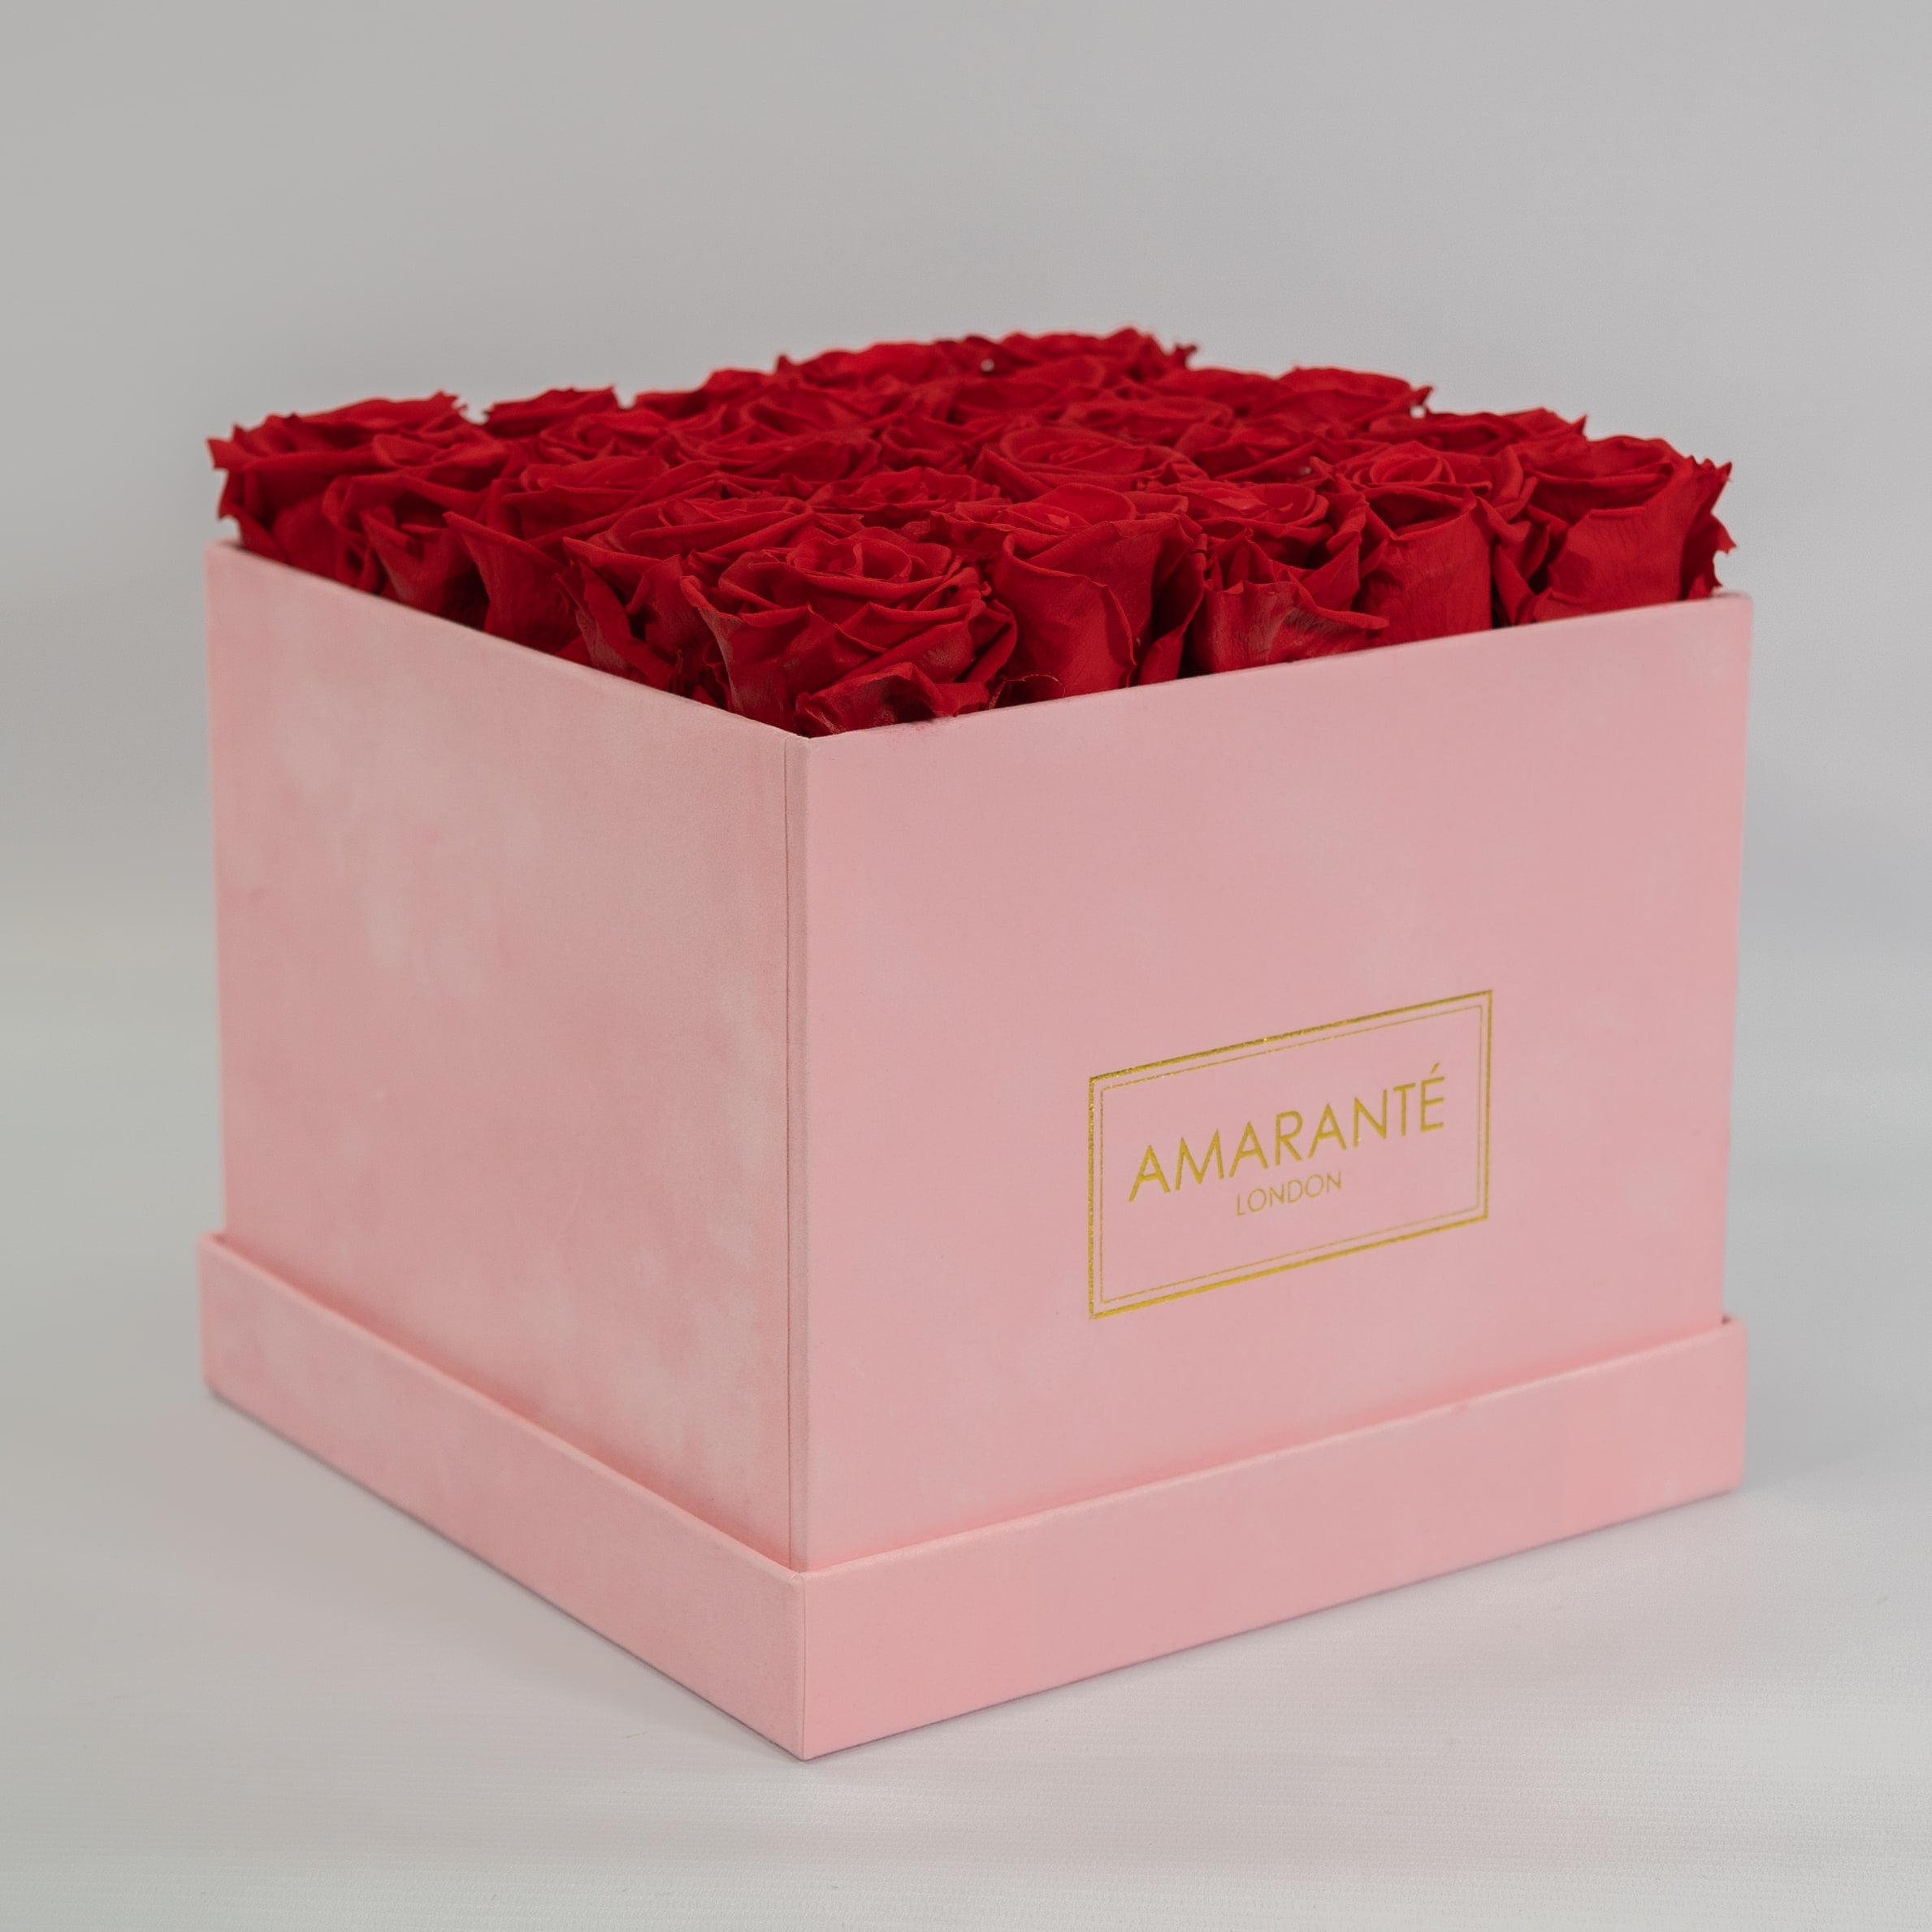 Aromatic red roses bursting with fiery shades in a blushing pink box  